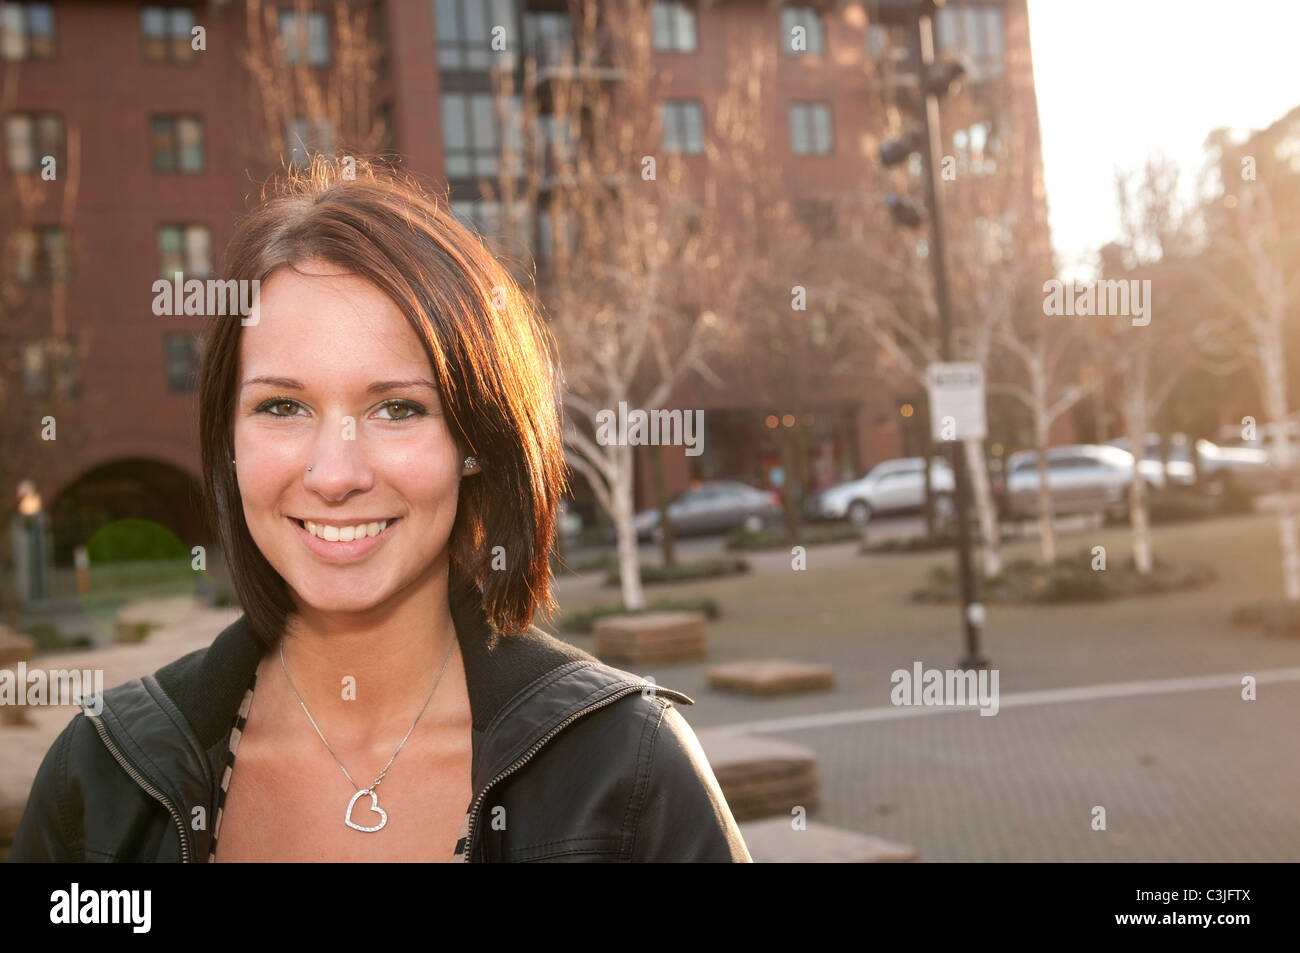 Portrait of smiling young woman outdoors Banque D'Images